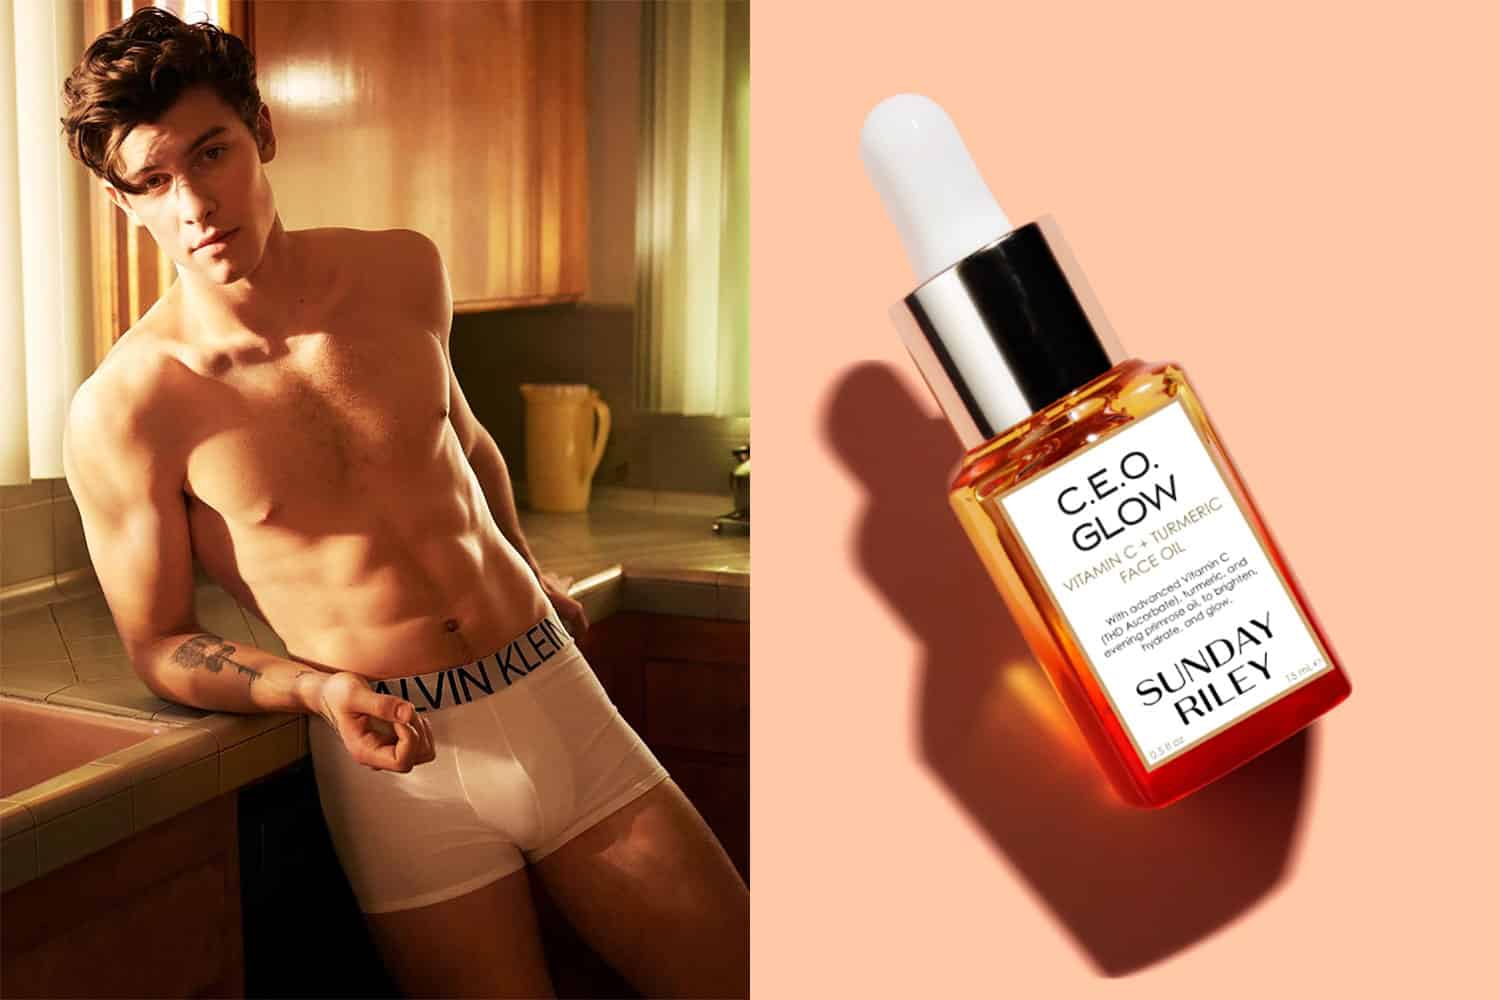 More Bad News for Calvin Klein, FTC Lets Sunday Riley Off Easy